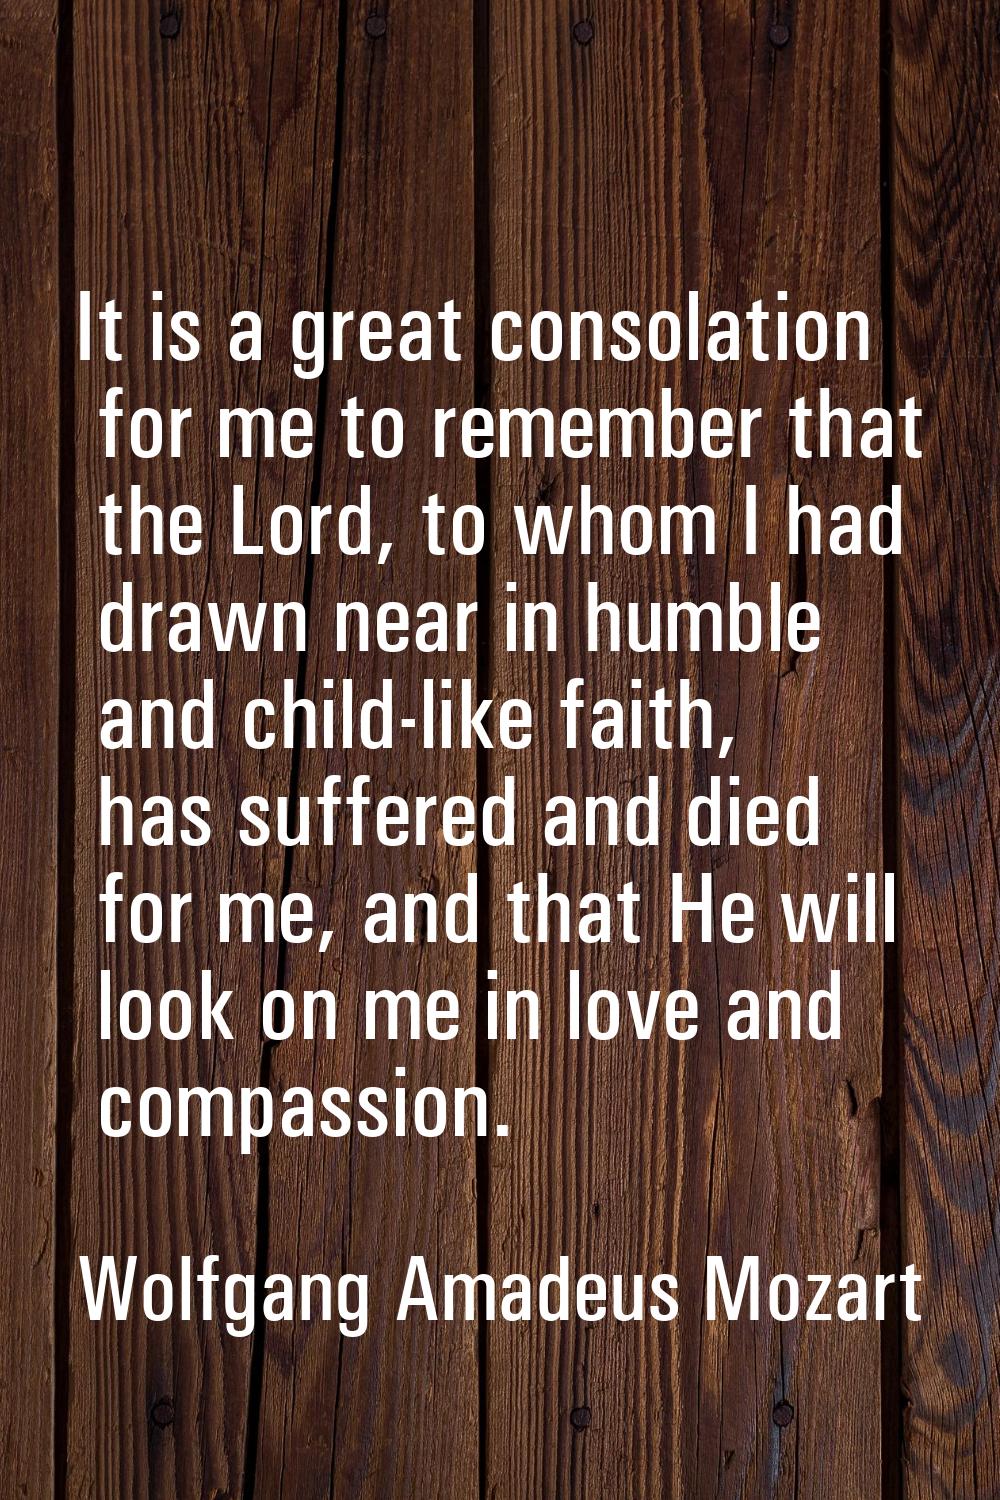 It is a great consolation for me to remember that the Lord, to whom I had drawn near in humble and 